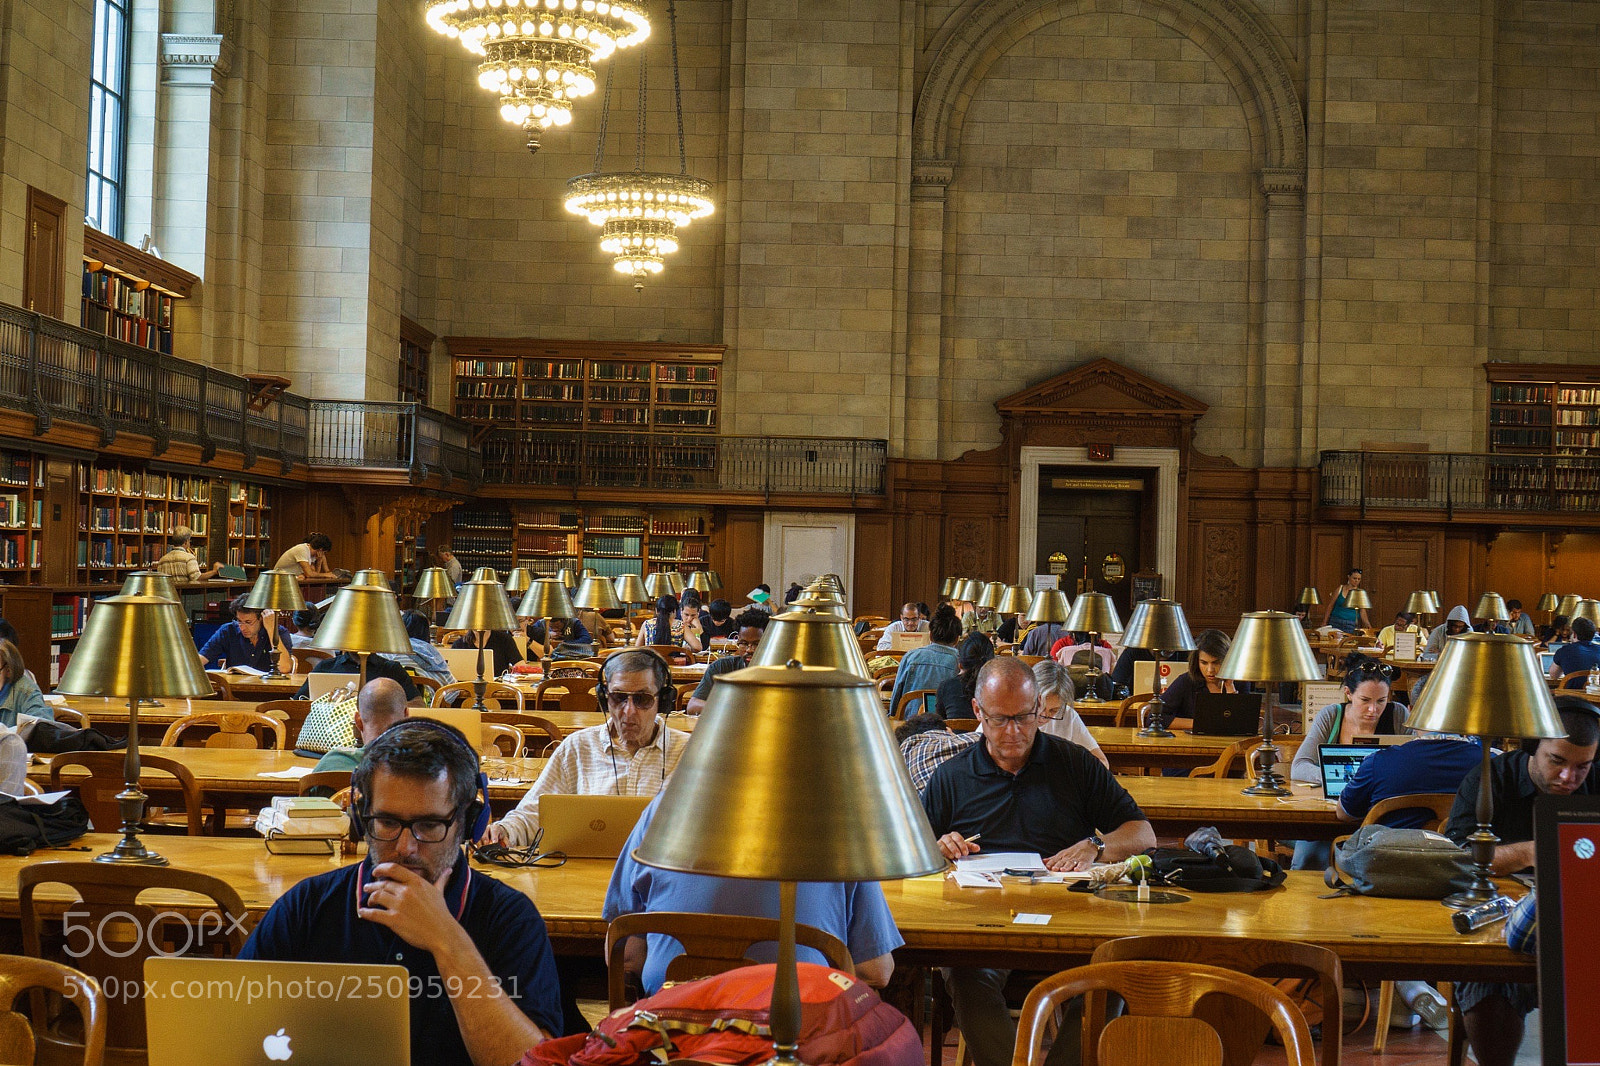 Sony a6000 sample photo. New york public library photography